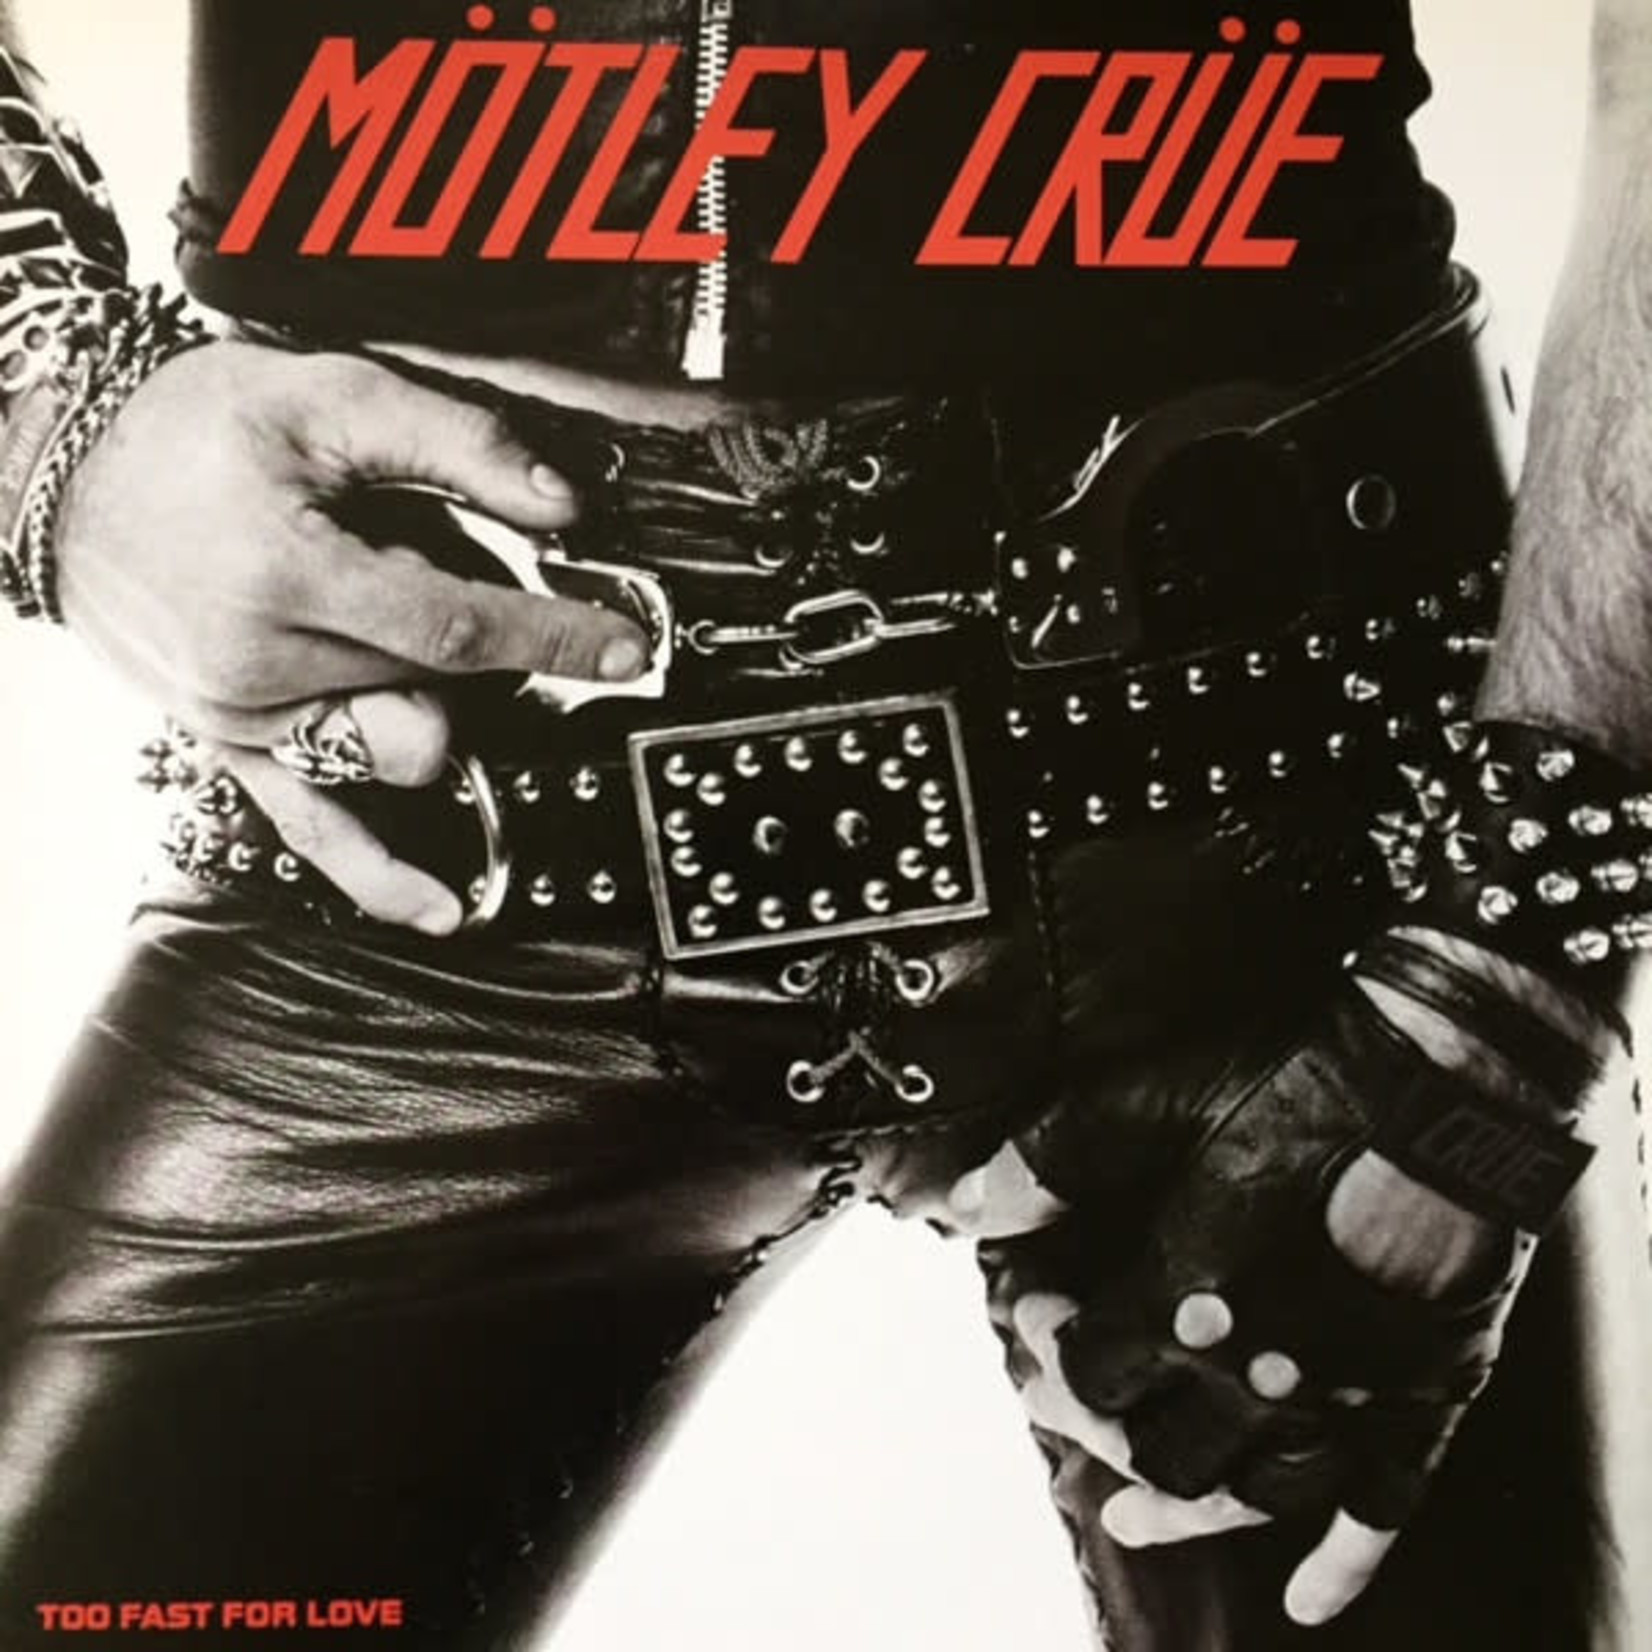 [Vintage] Motley Crue - Too Fast for Love (reissue)